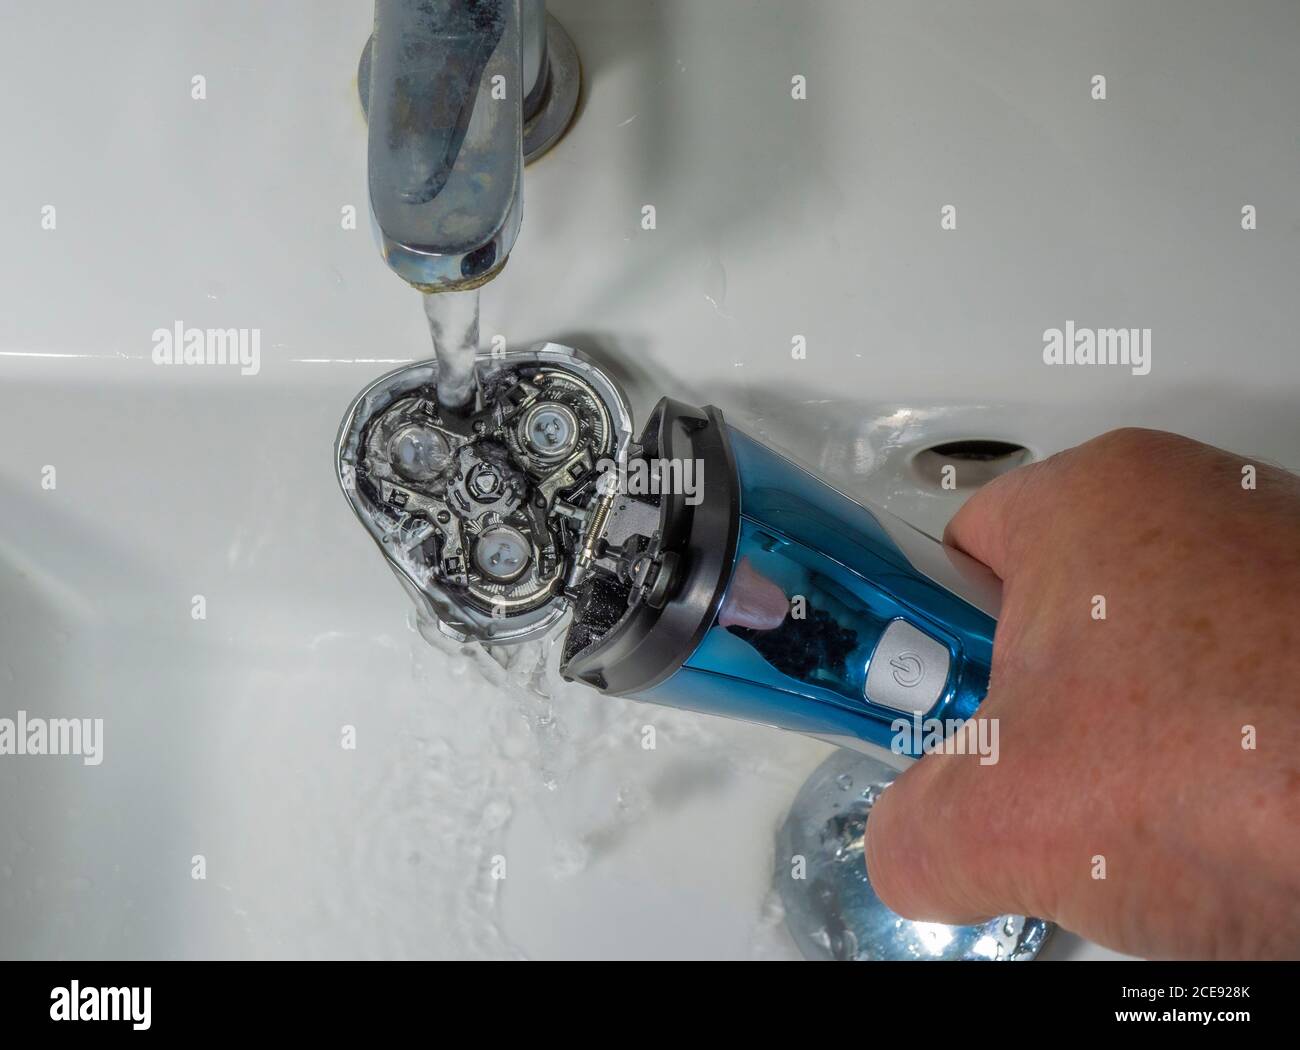 Closeup POV shot of a man’s hand holding a battery powered shaver under the flow of water from a bathroom sink tap, to wash away the dust and hair. Stock Photo